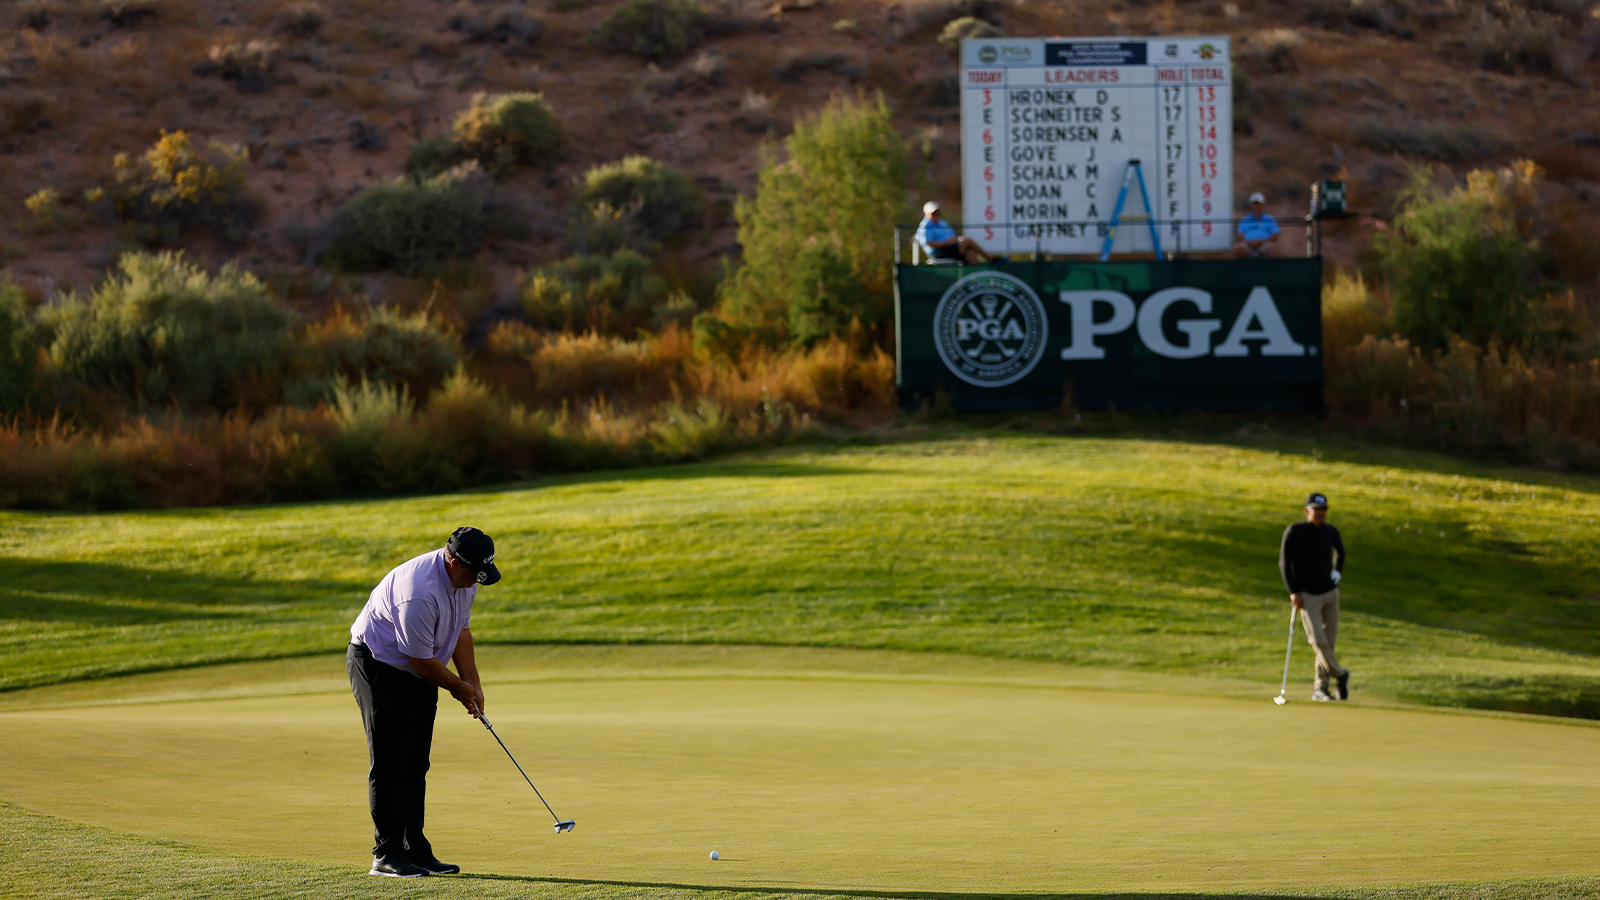 David Hronek putts on the 18th hole during the third round of the 34th Senior PGA Professional Championship at Twin Warriors Golf Club on October 15, 2022 in Santa Ana Pueblo, New Mexico. (Photo by Justin Edmonds/PGA of America)